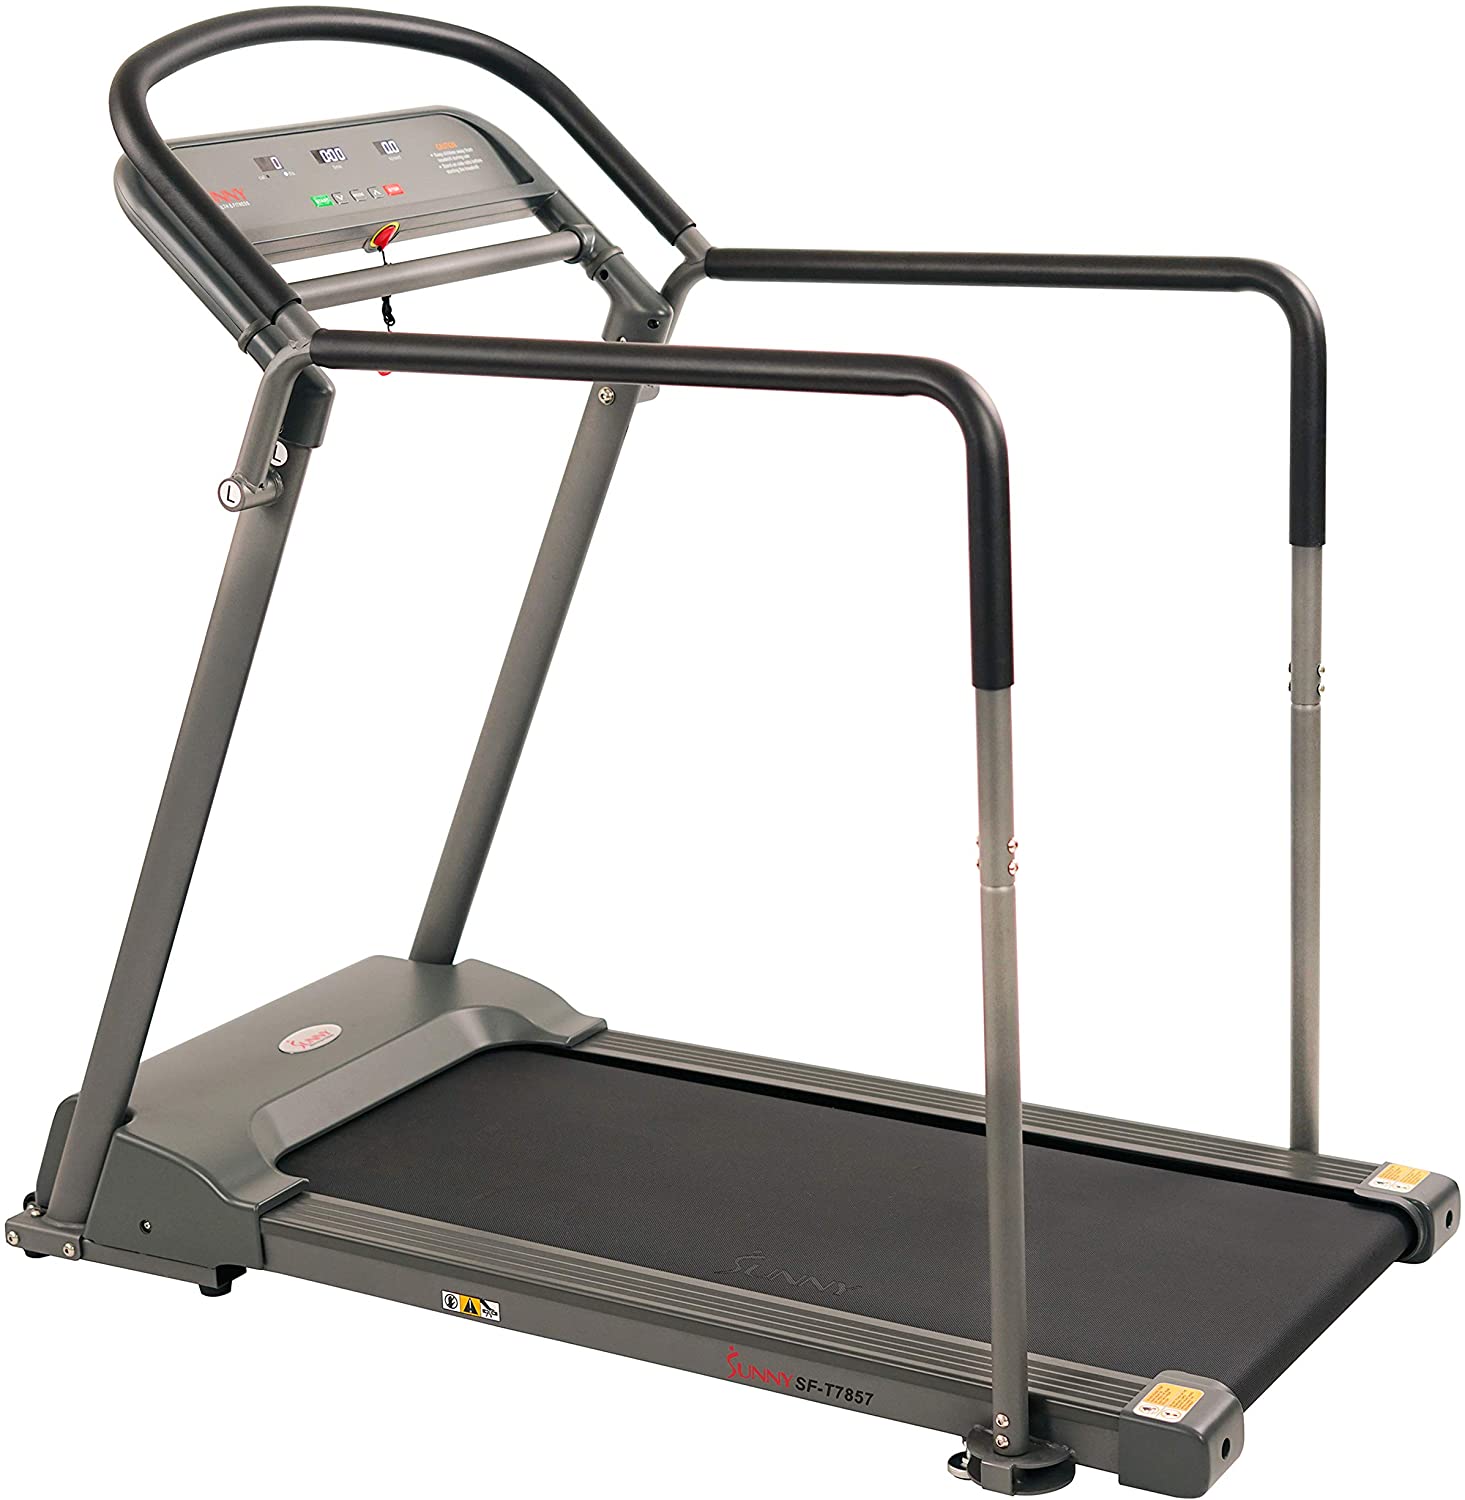 12 Best Treadmills for Walking Reviews & Buying Guide